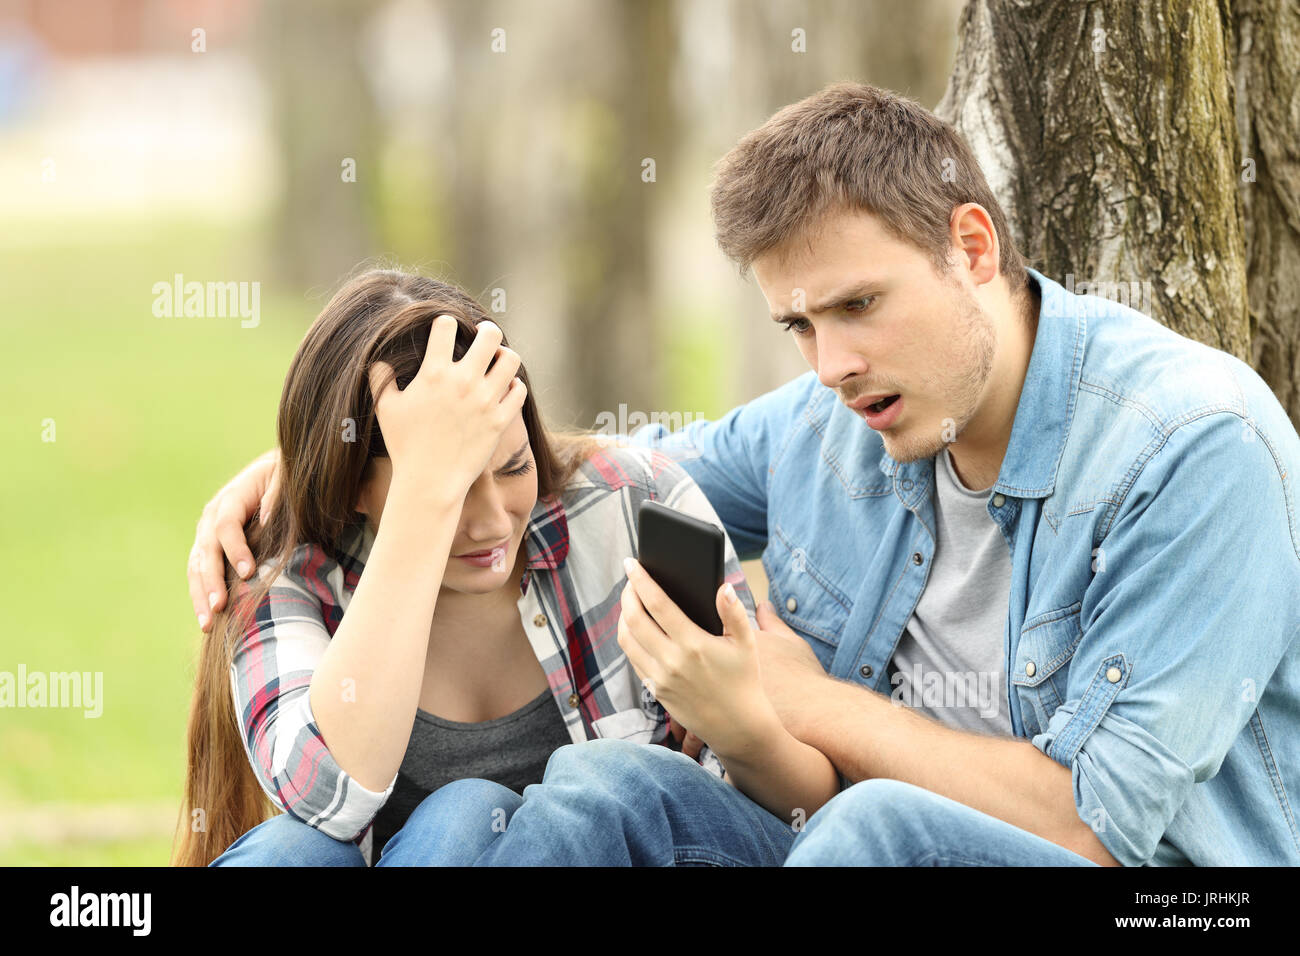 Sad woman shows negative message to a surprised friend sitting on the grass in a park Stock Photo